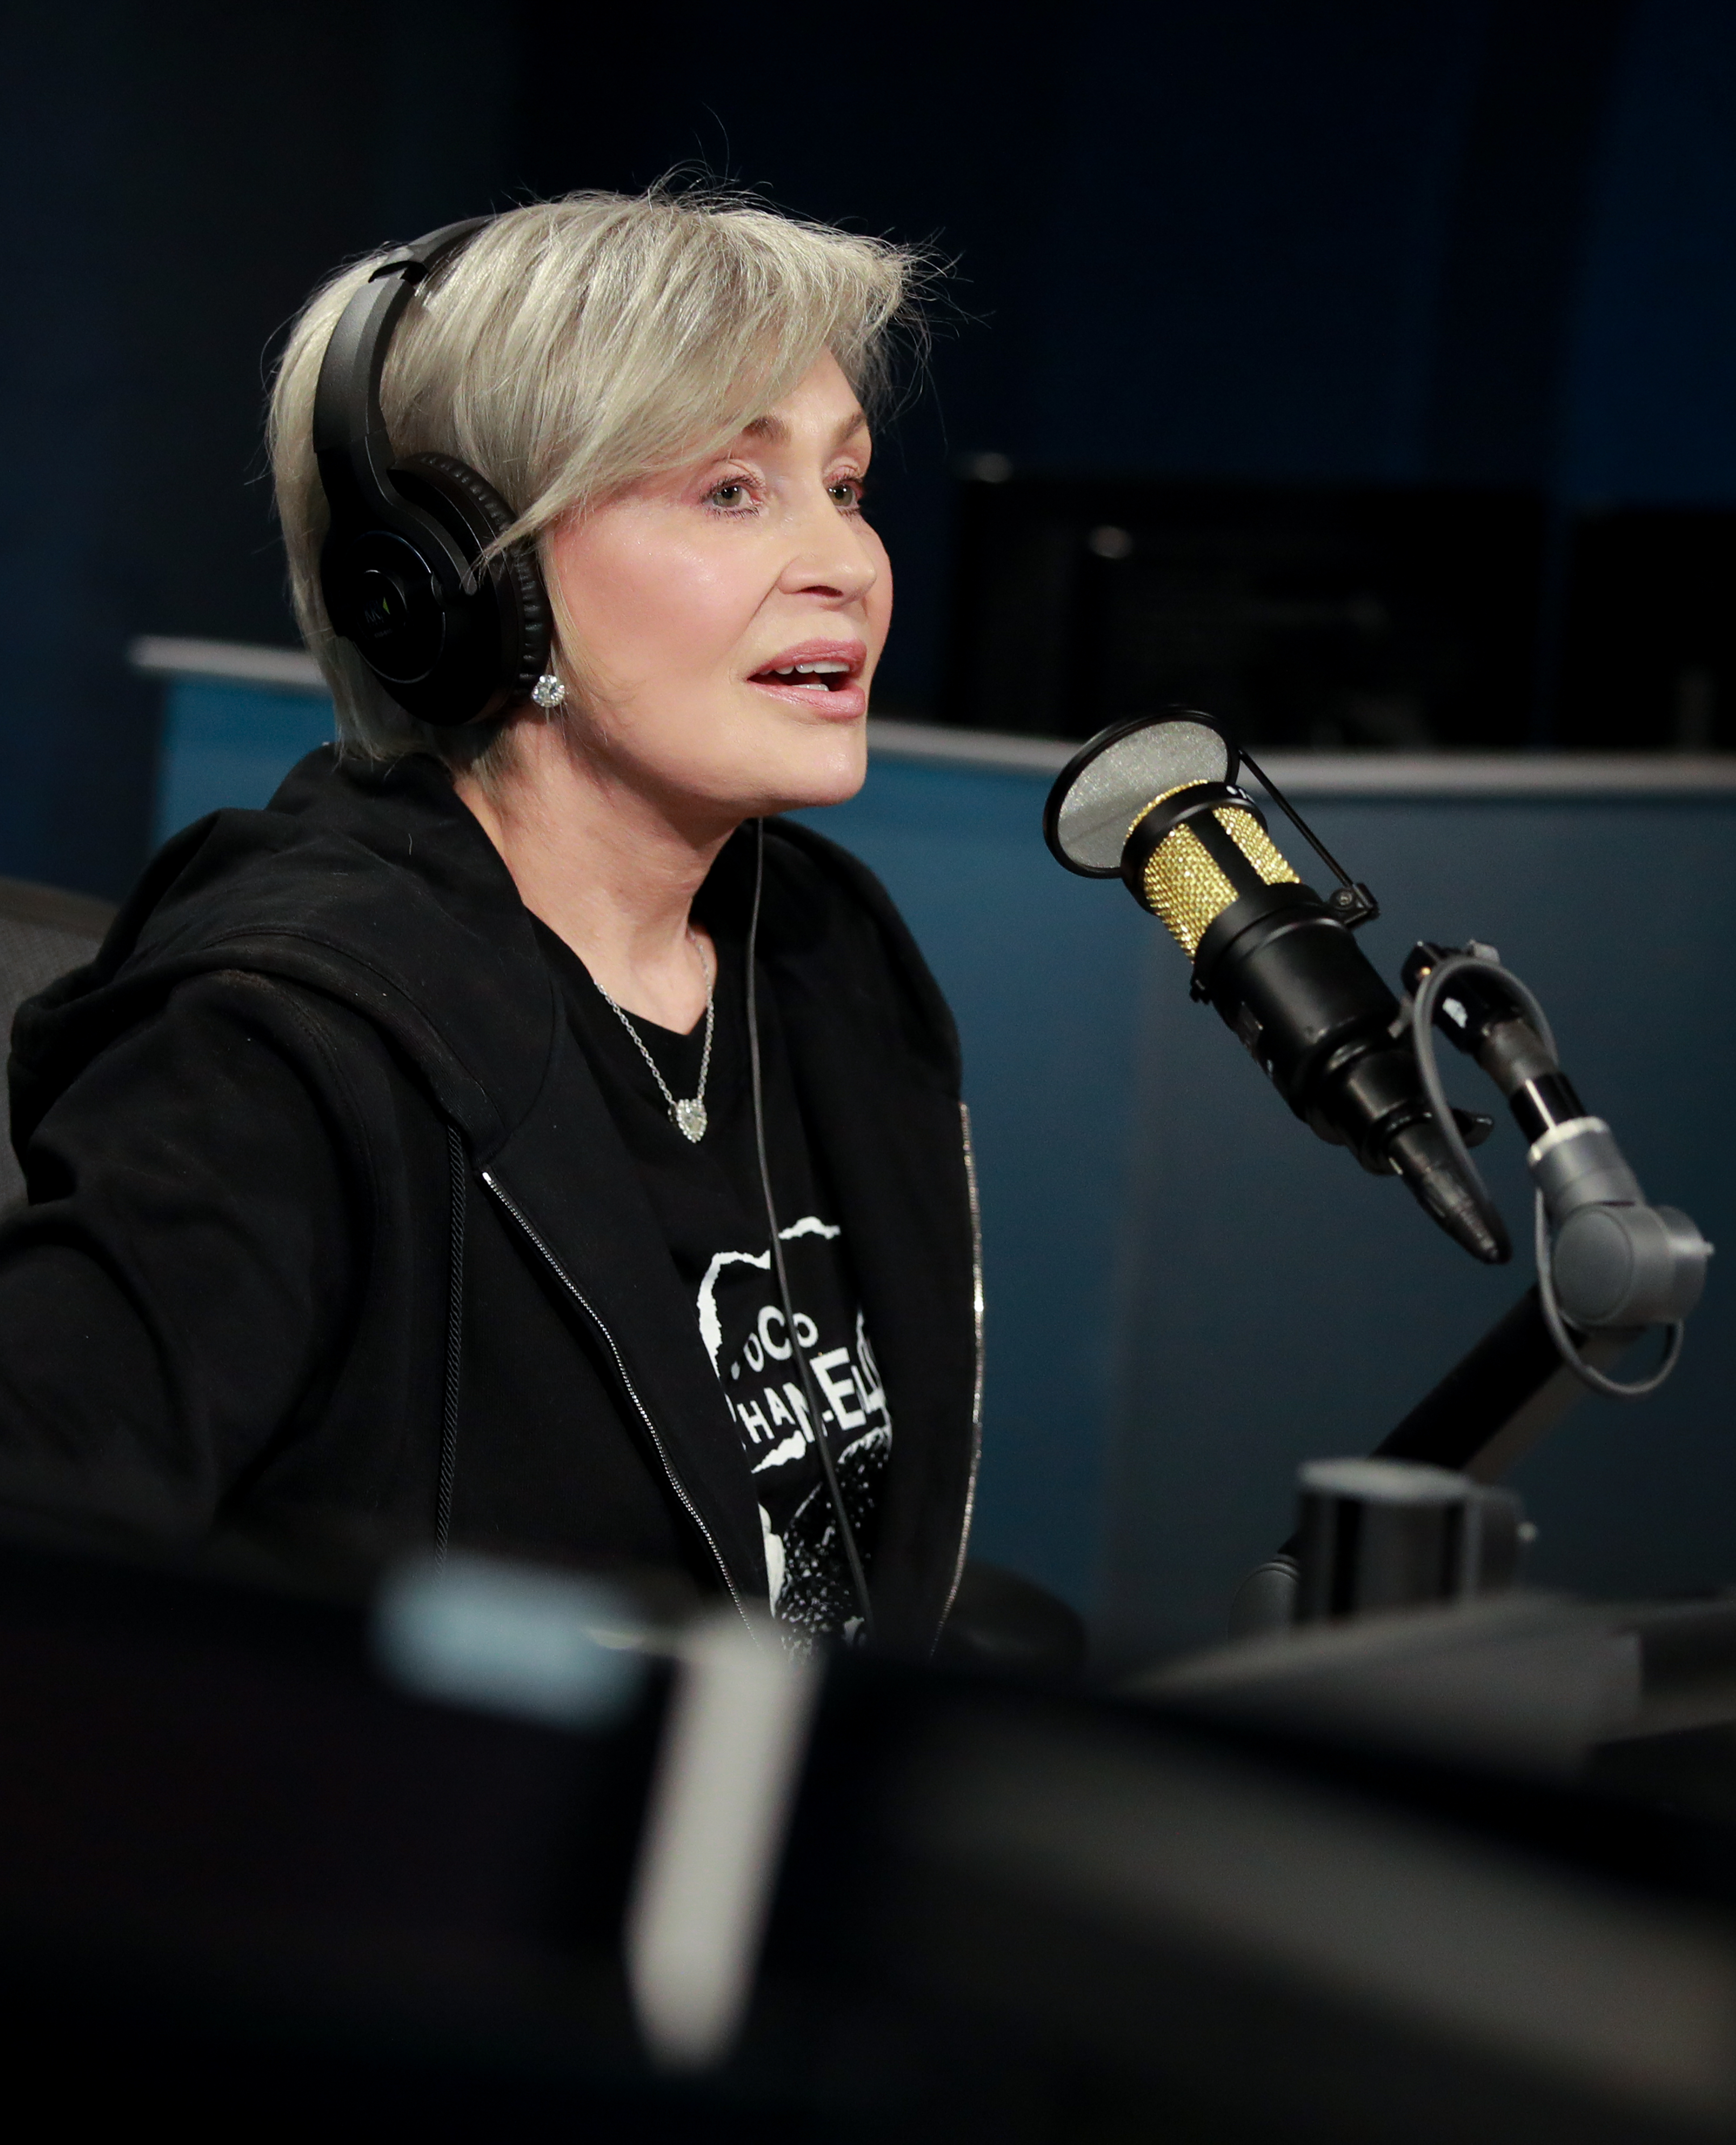 Close-up of Sharon seated and wearing headphones in front of a microphone